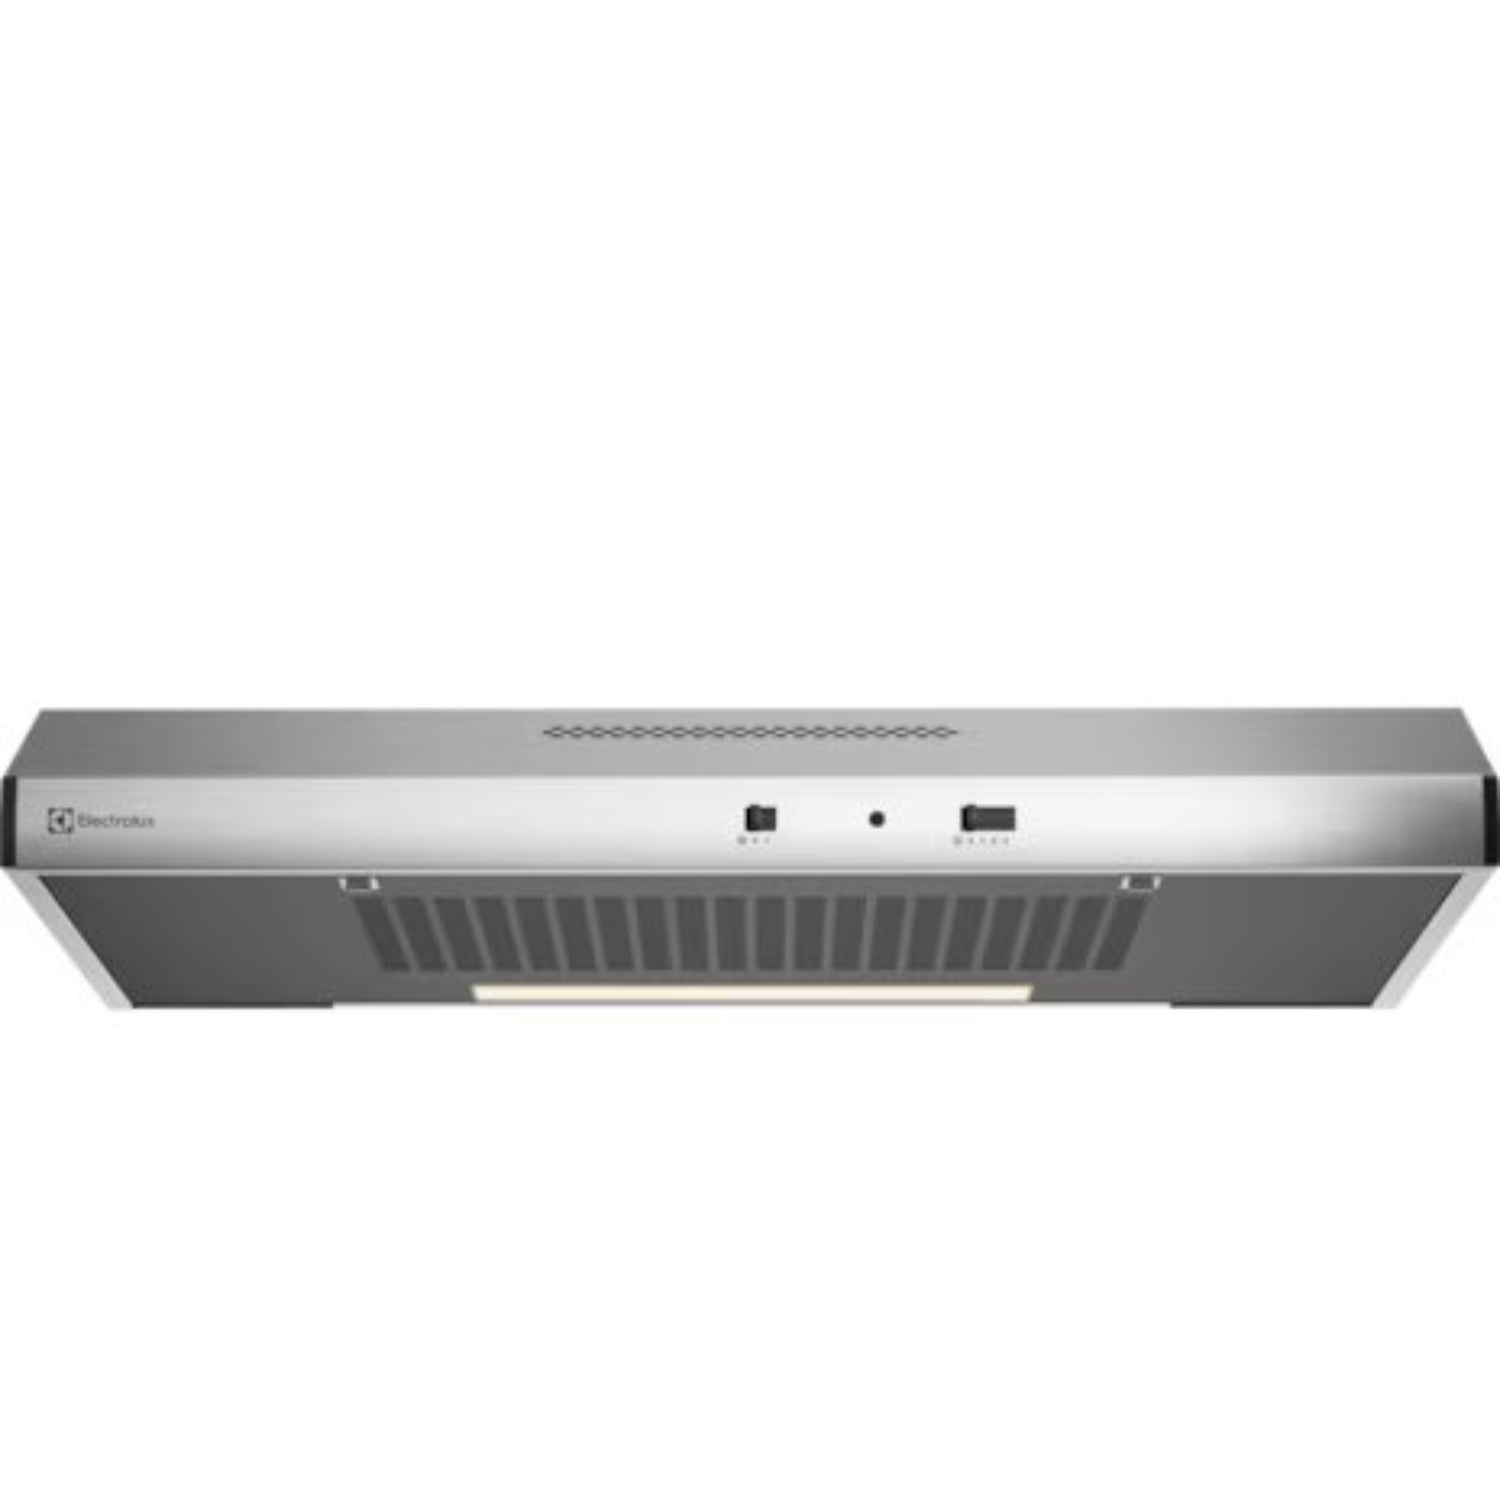 Electrolux 90cm Fixed Extractor Hood with 3 Speed Settings and Dishwasher-safe Filter, Stainless Steel